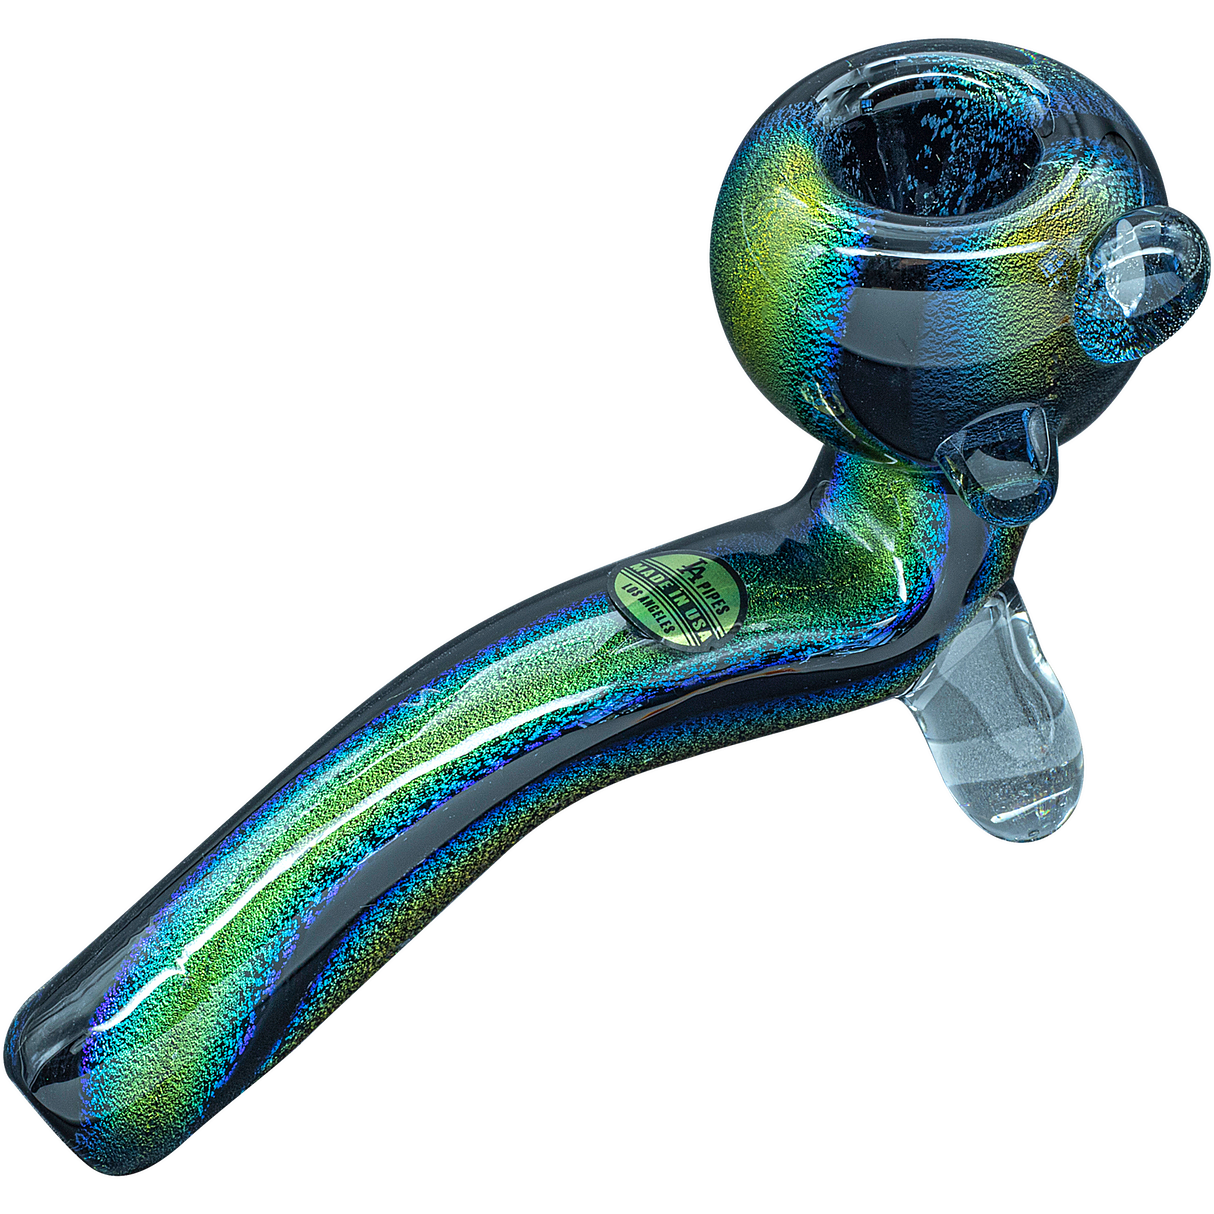 LA Pipes "The Galaxy" Dichroic Sherlock Pipe with vibrant color swirls, side view on white